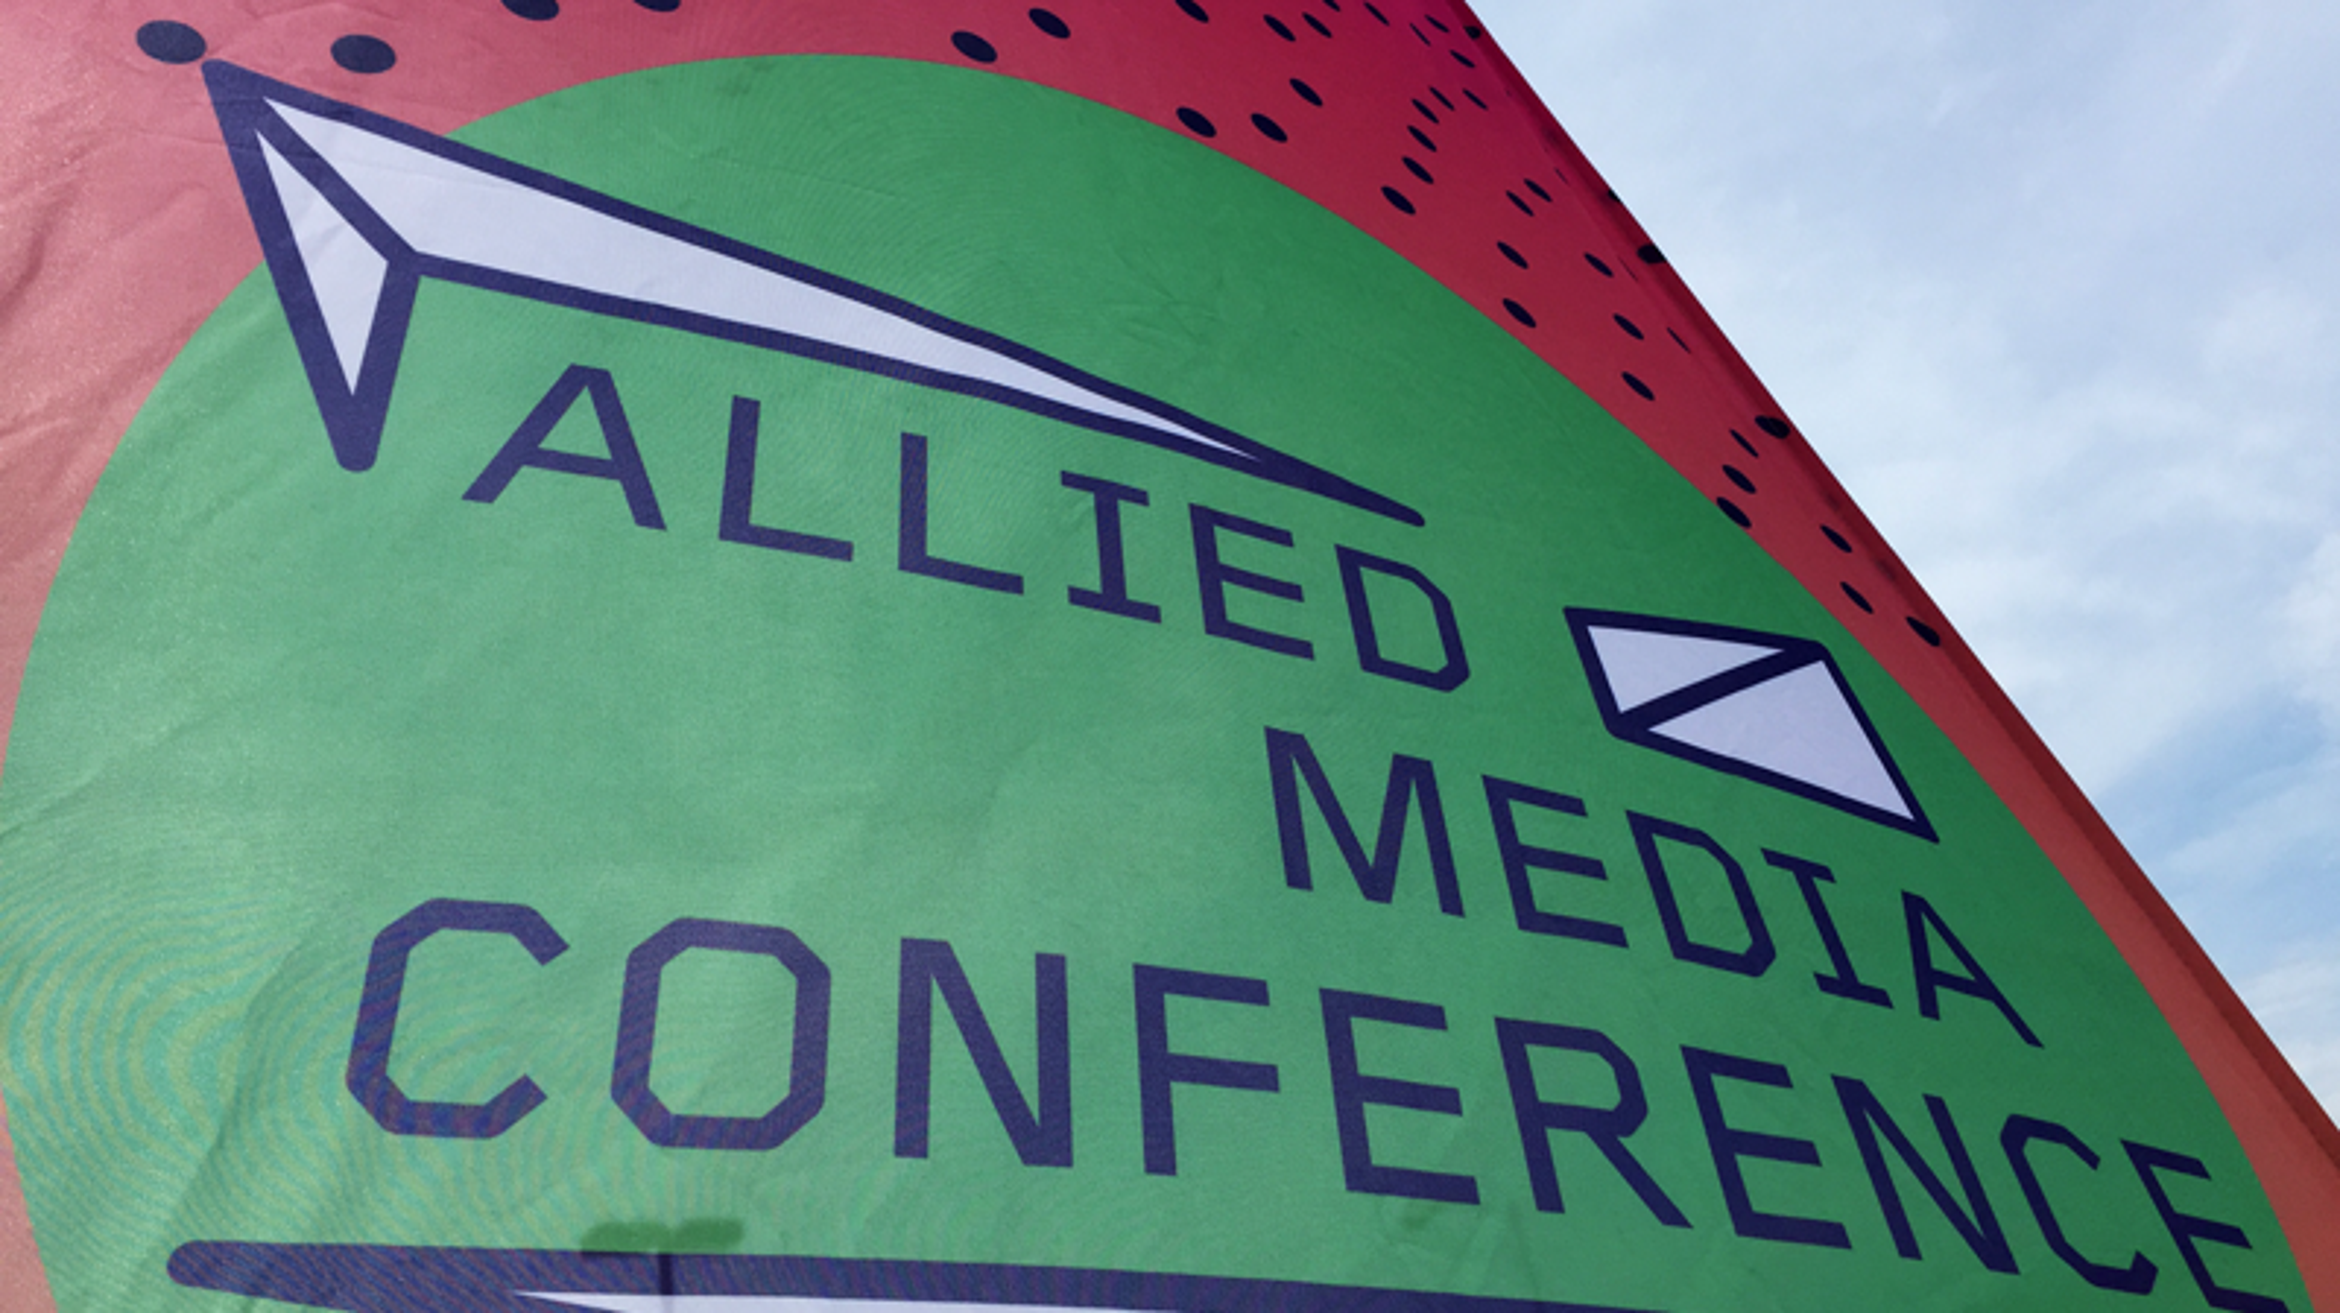 The Allied Media Conference Sparks Conversation on Communication WDET